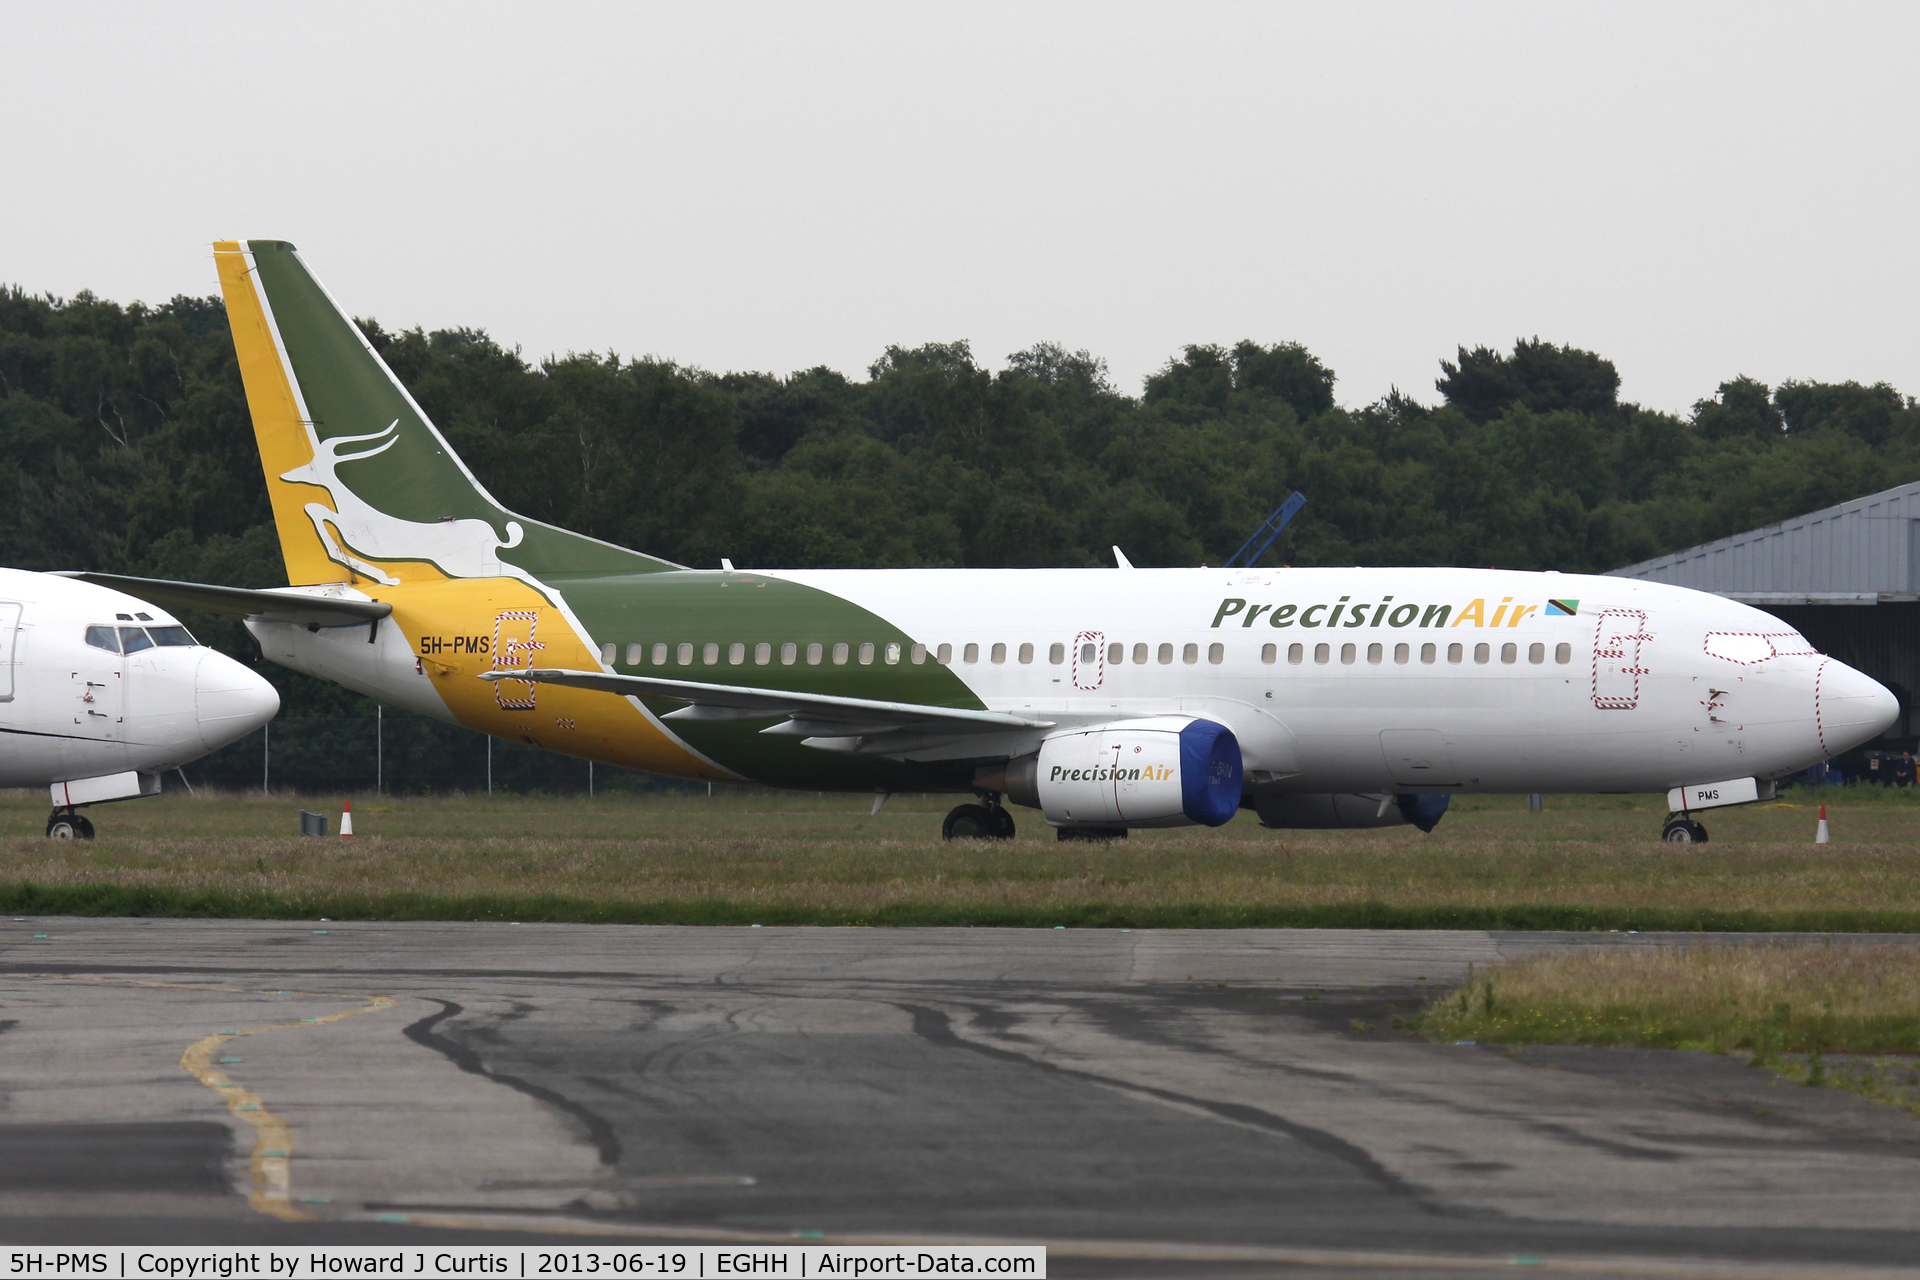 5H-PMS, 1999 Boeing 737-36N C/N 28596, Precision Air, stored here after lease.